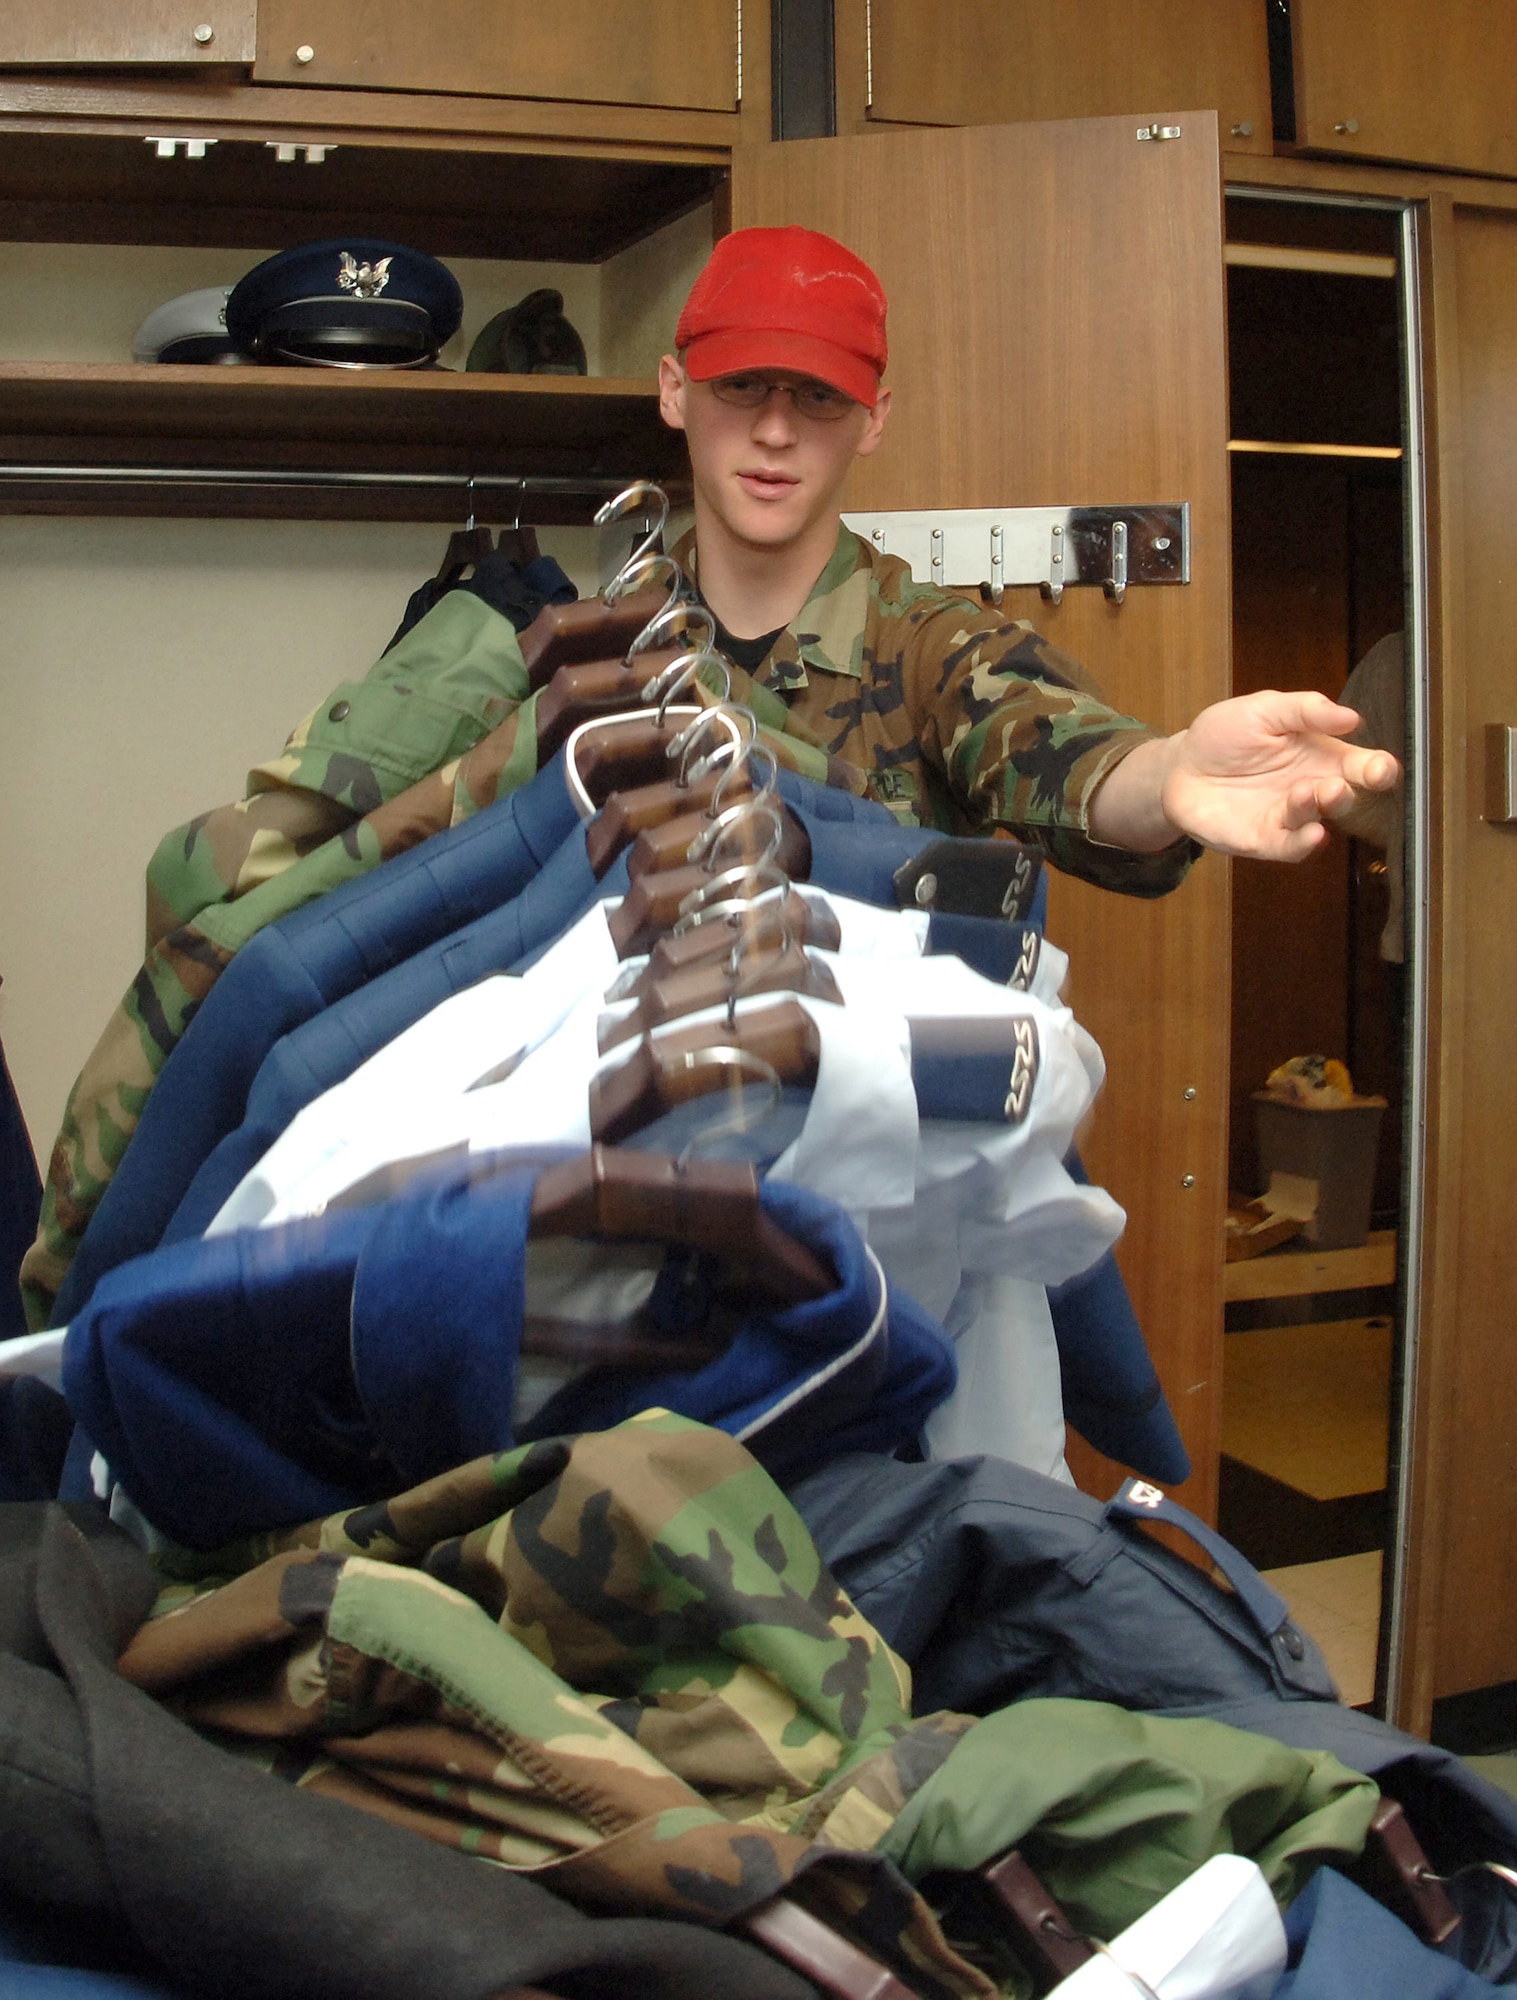 Cadet 1st Class Andrew Havko dumps the contents of a fourthclassmen's closet Saturday, March 18, 2006, at the U.S. Air Force Academy, Colo. The inspection, where upperclassmen leave fourth class cadets rooms in disarray, is a tradition during recognition. (U.S. Air Force photo/Joel Strayer) 